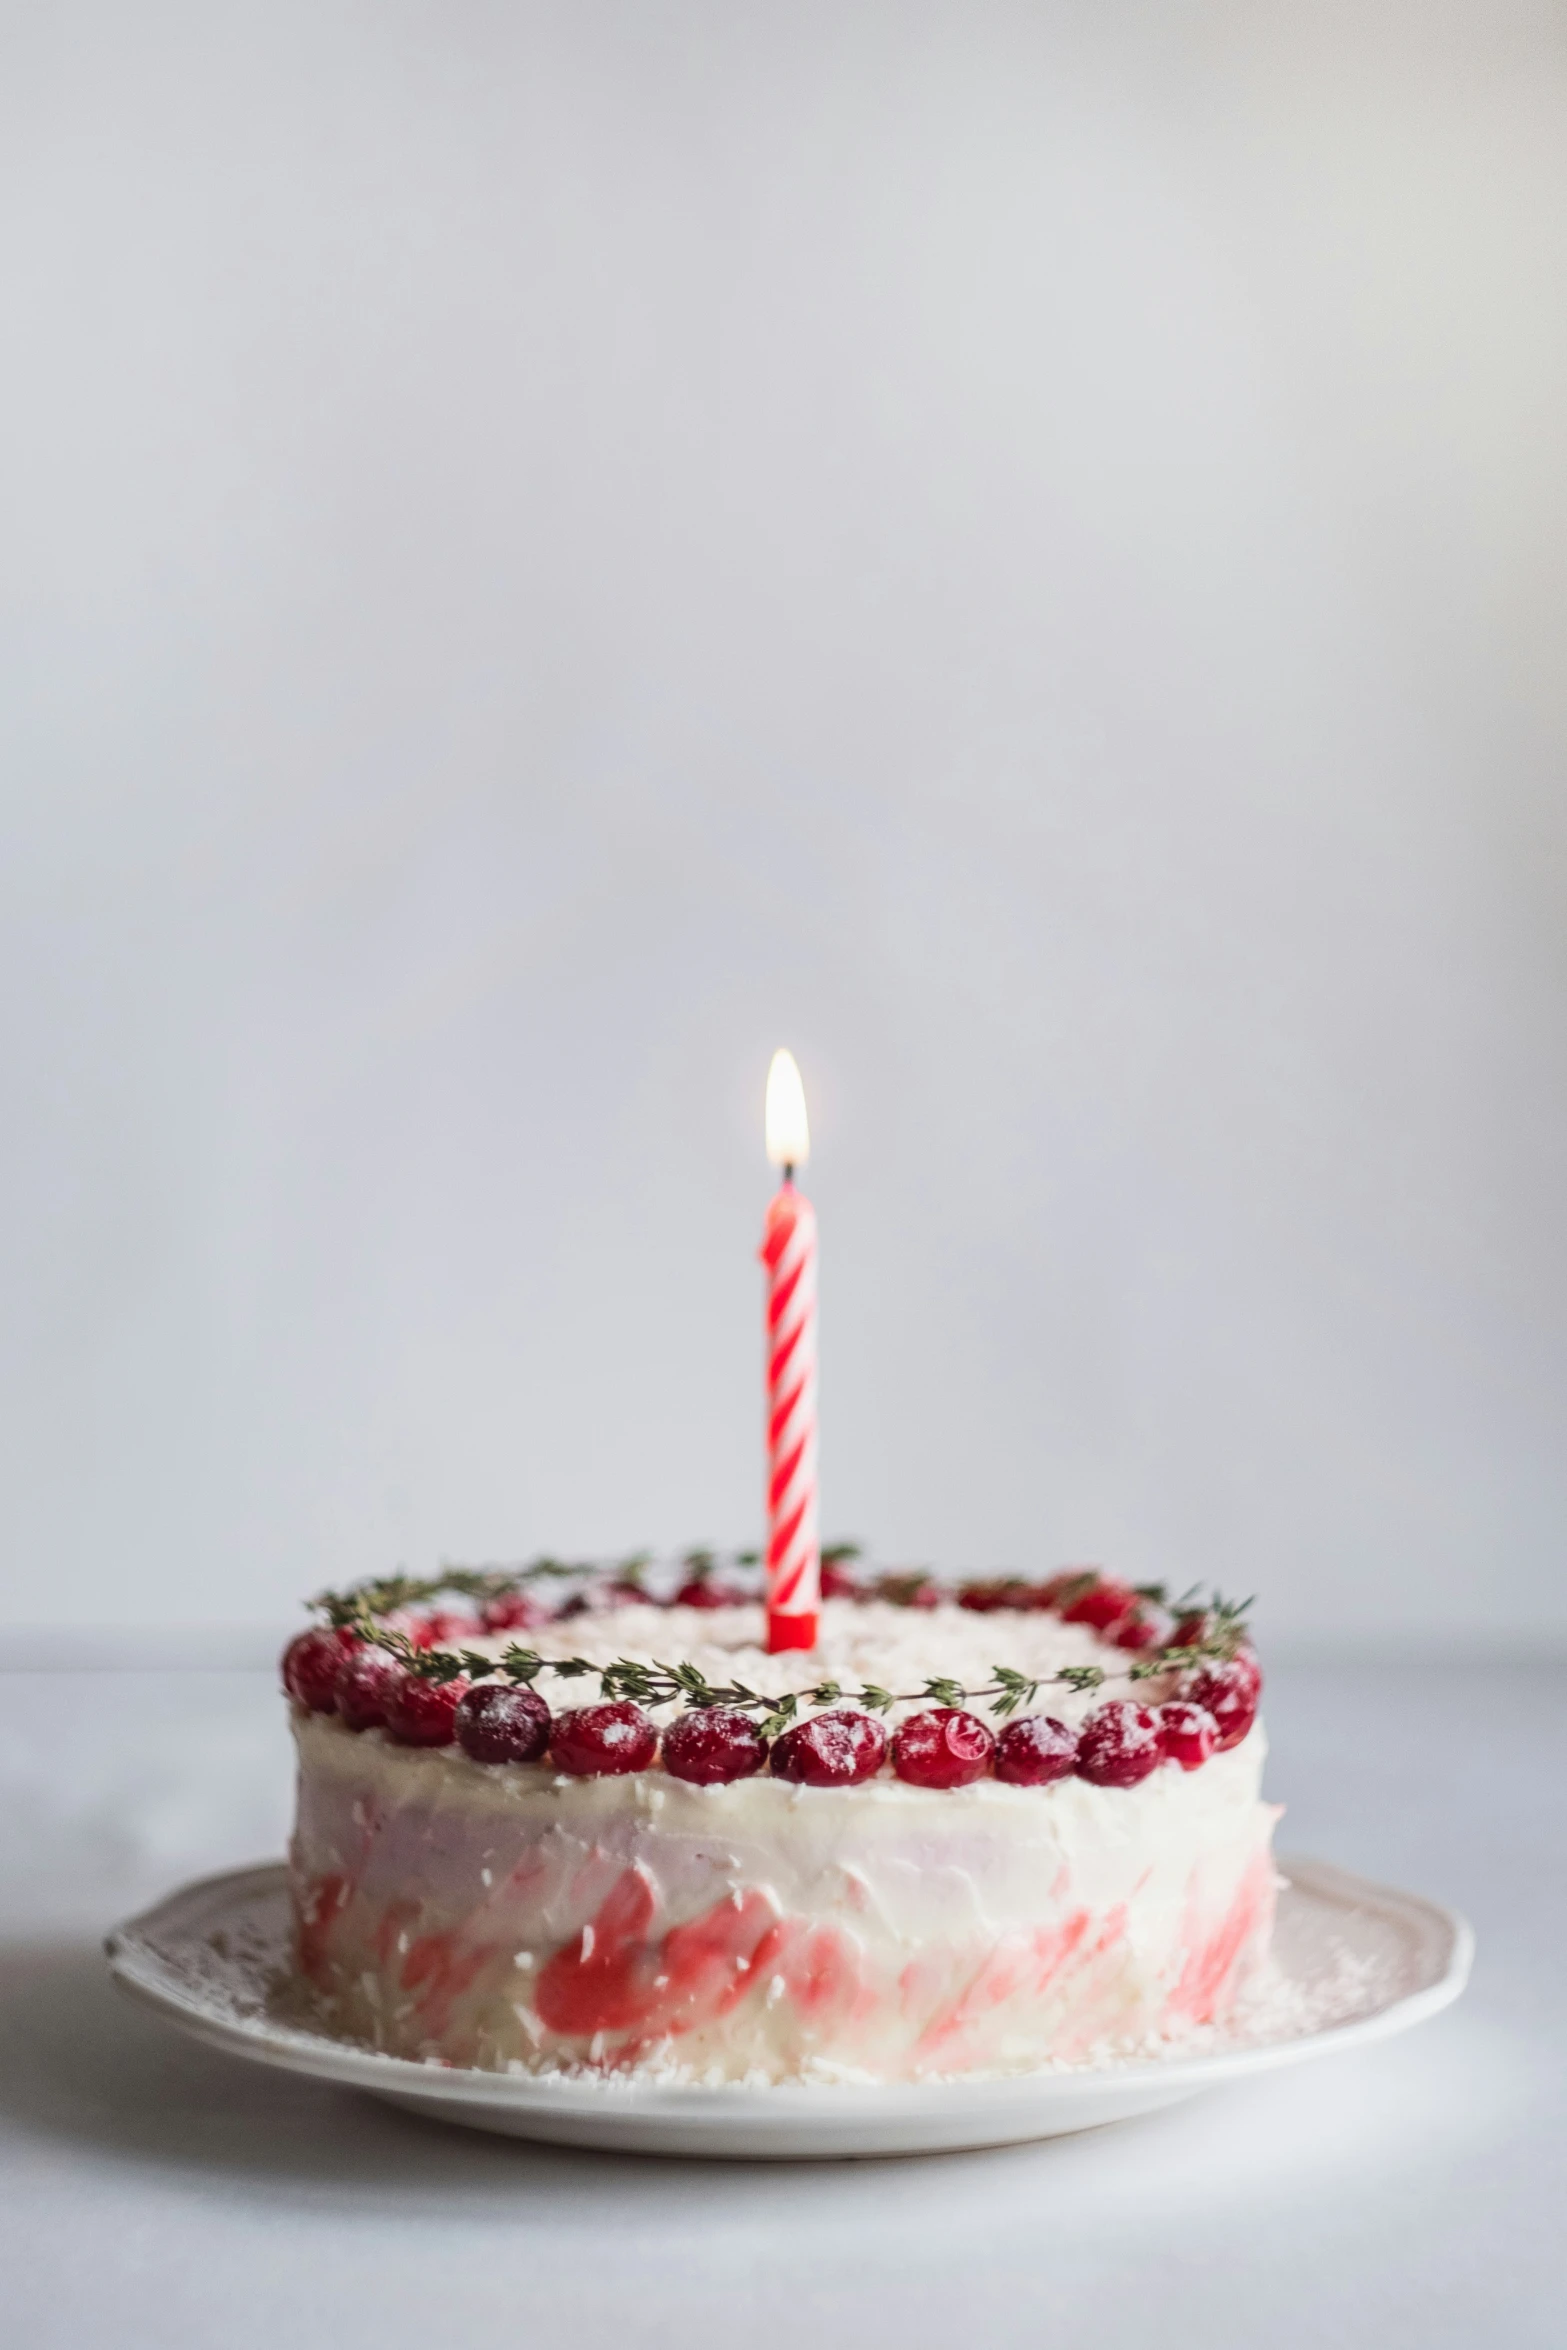 a birthday cake with a lit candle on a plate